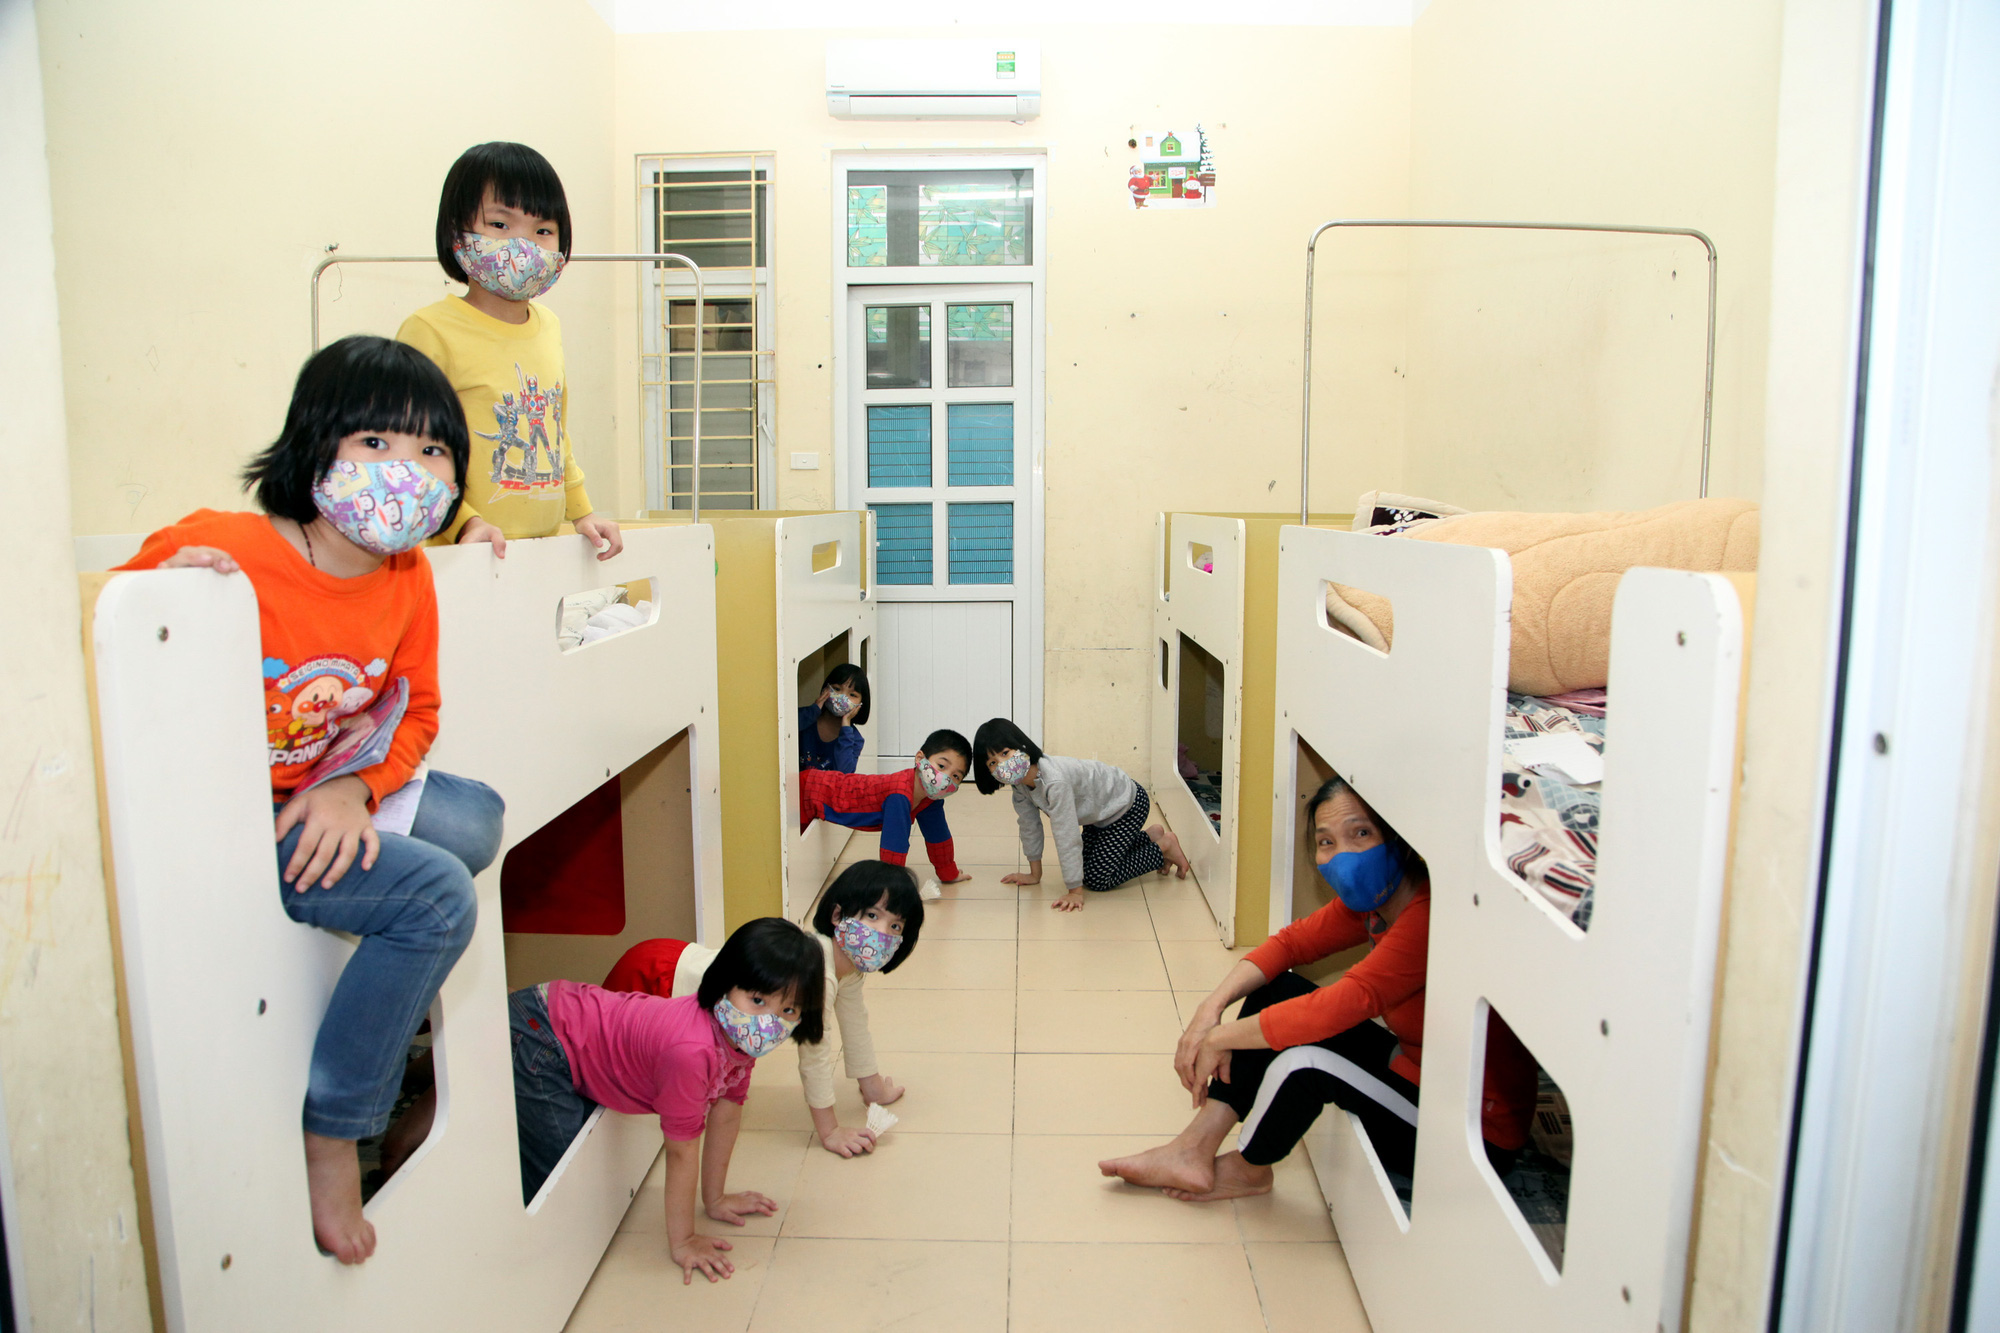 Policies on care and nurture in social support facilities in Vietnam